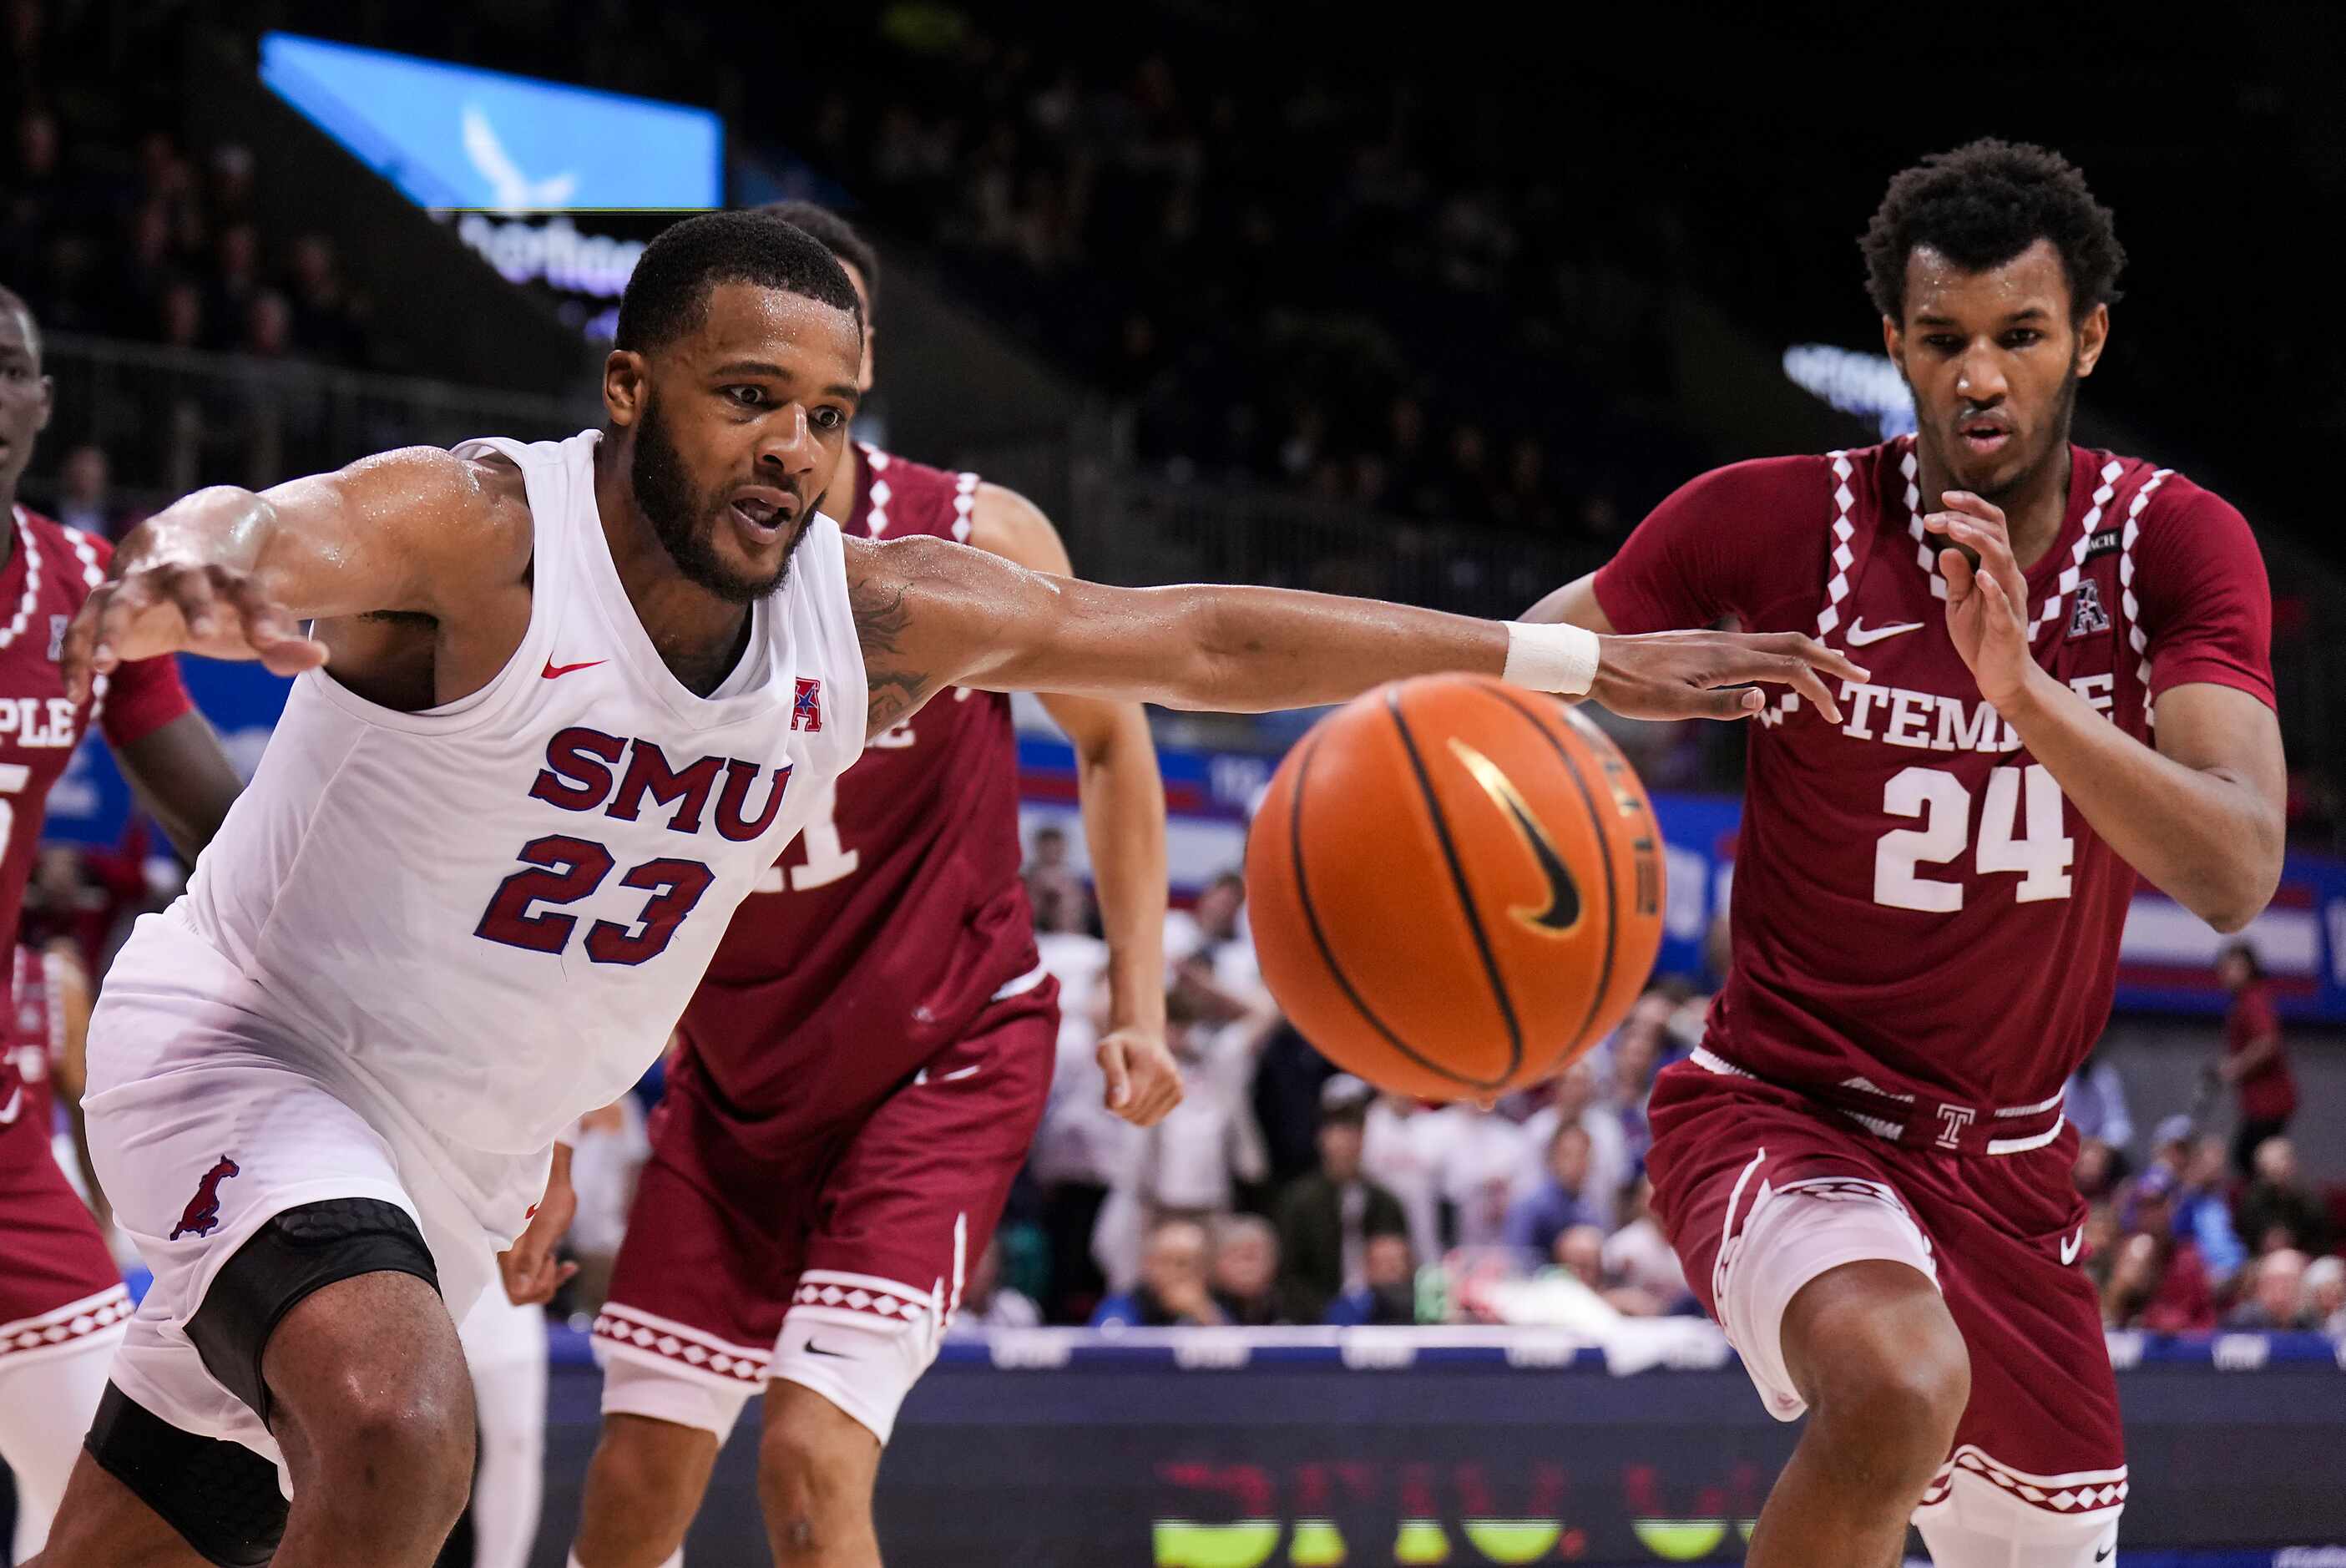 SMU forward Efe Odigie (23) chases a loose ball with Temple forward Zach Hicks (24) during...